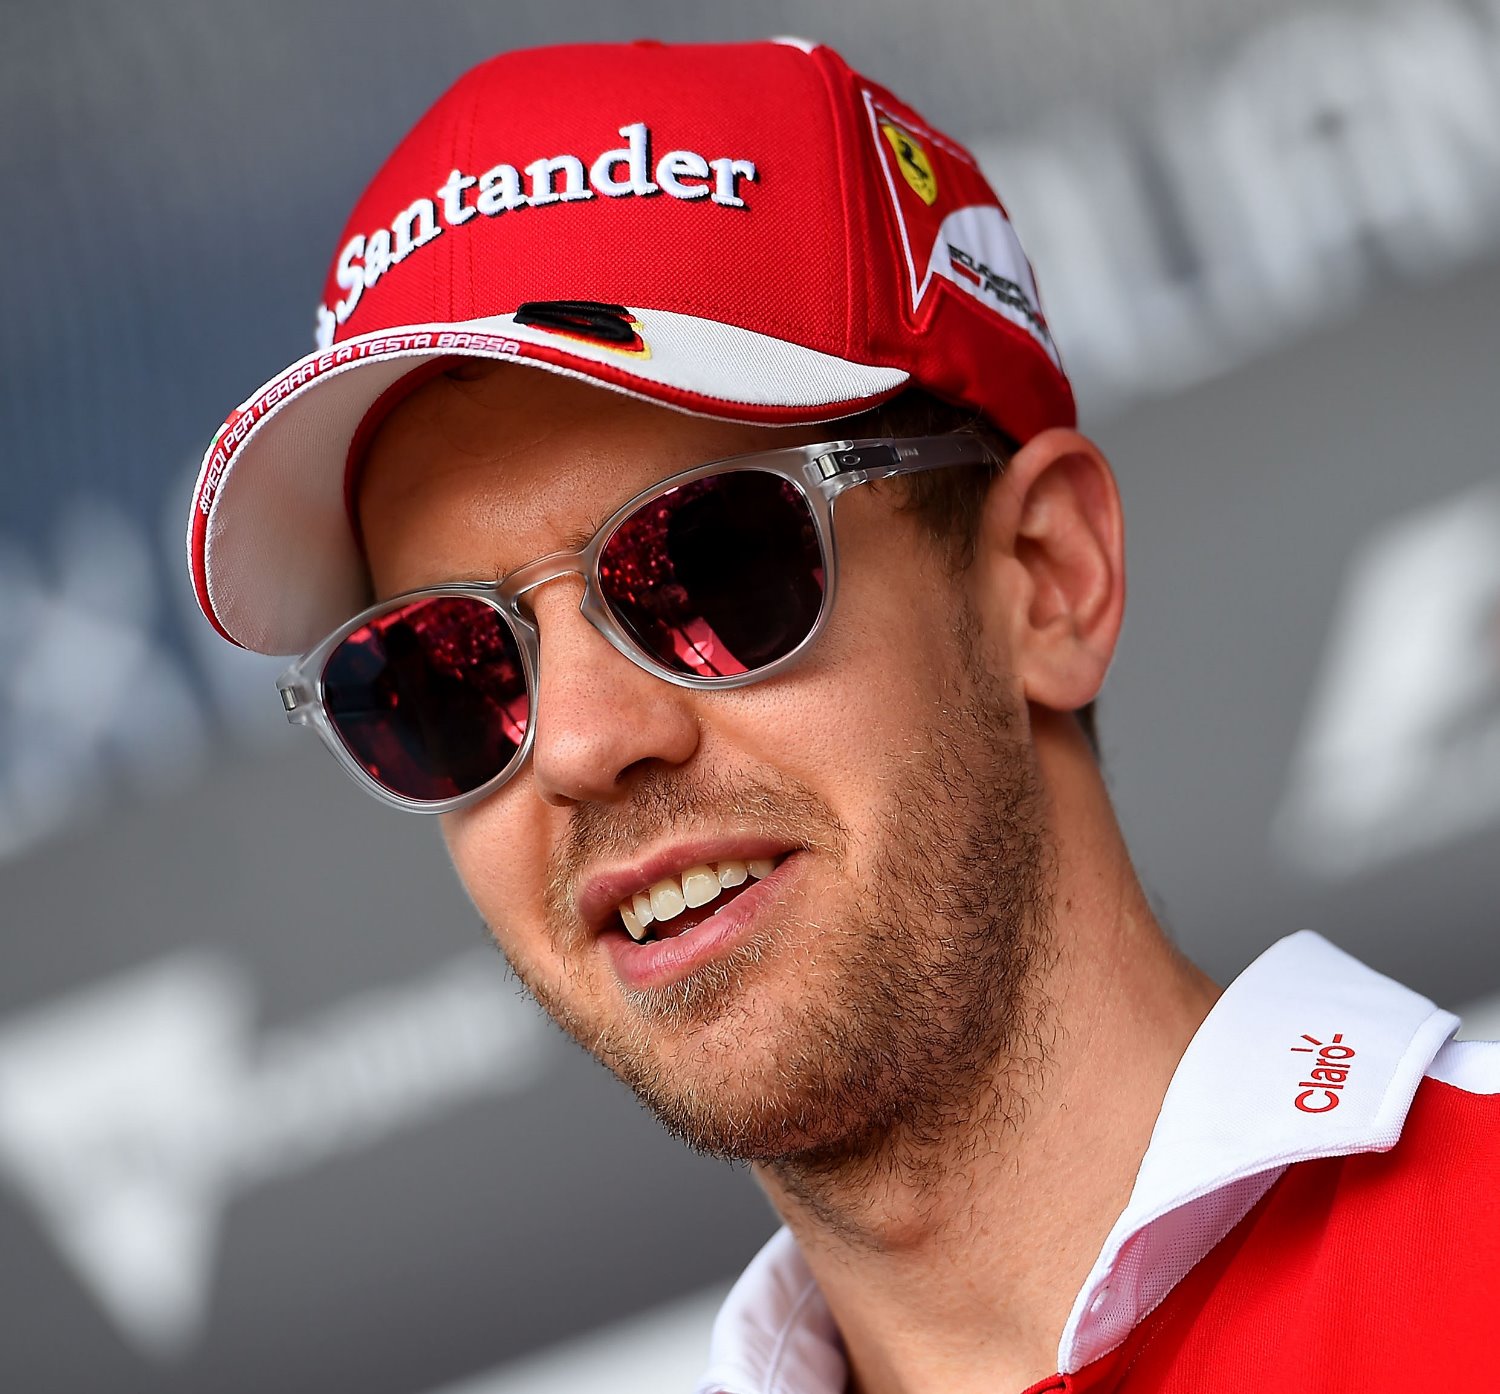 Vettel among drivers speaking out